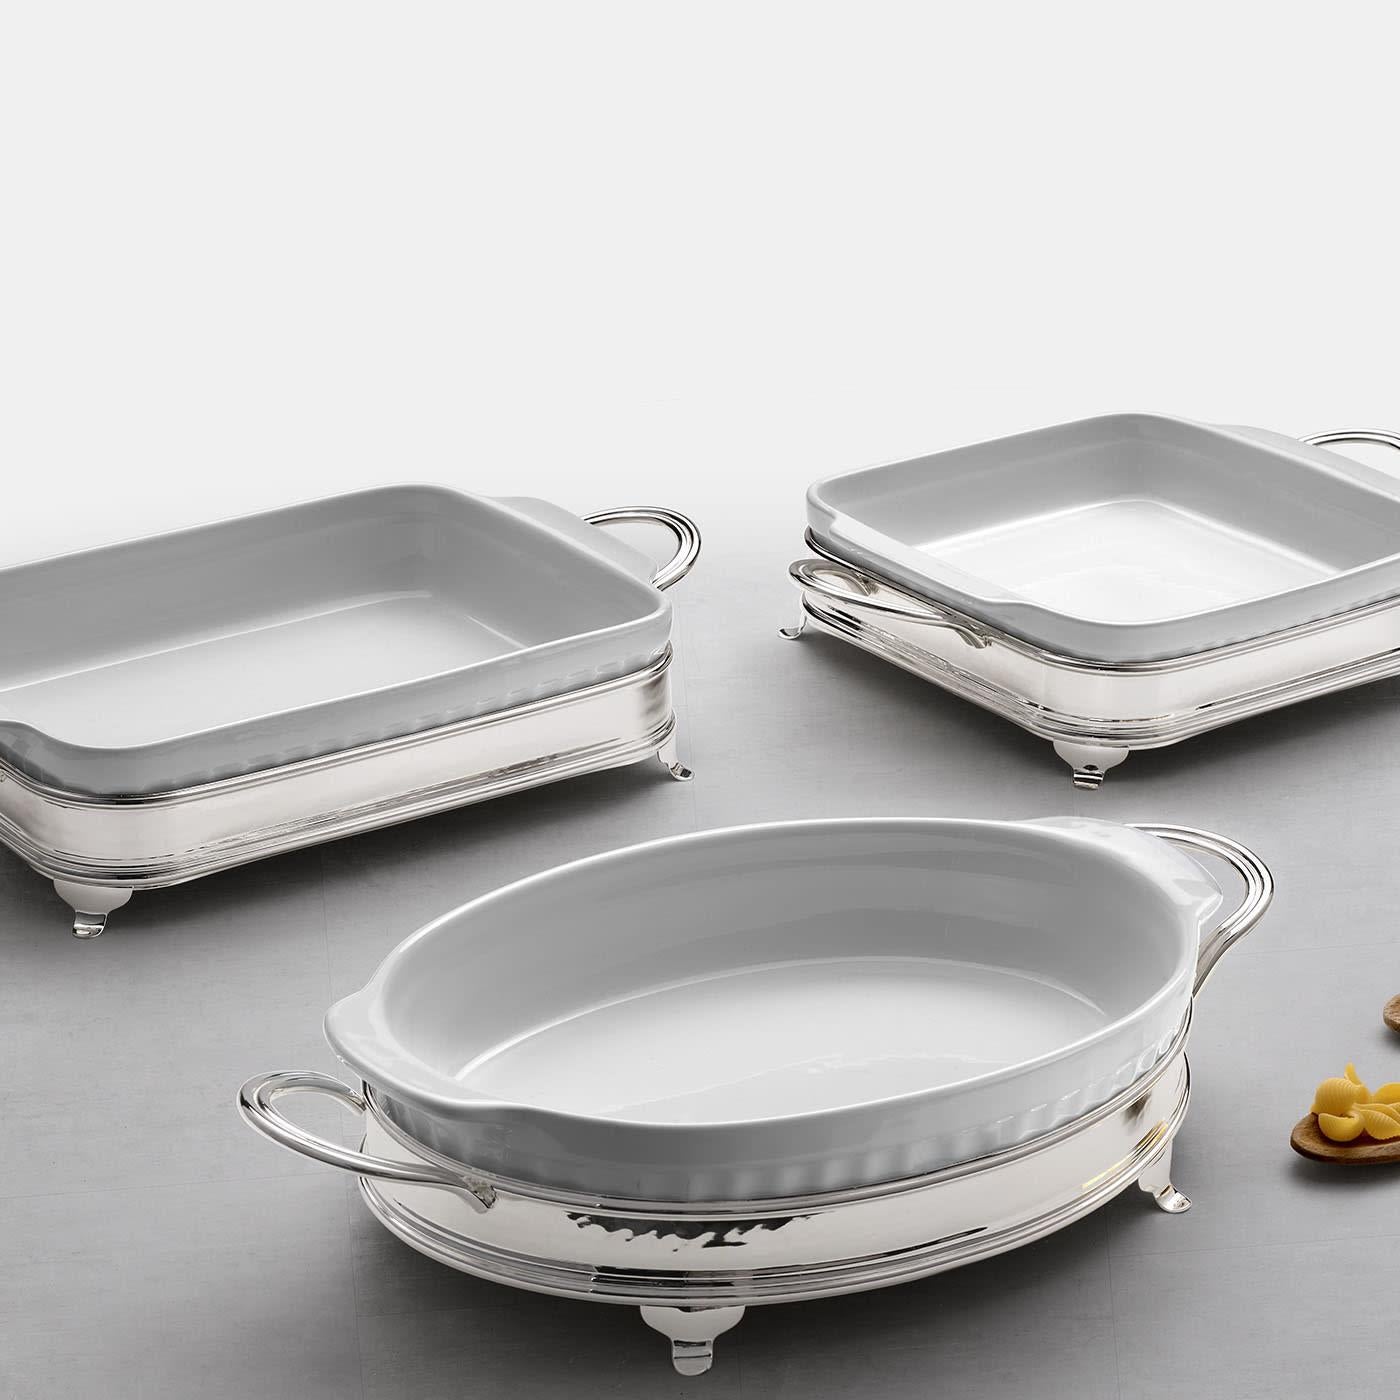 Precious silver and fine ceramic coexist in this elegant set including an oval ceramic baking dish and a brass holder equipped with two practical handles. Flaunting a gleaming silver plating, the holder also features four tiny feet allowing for